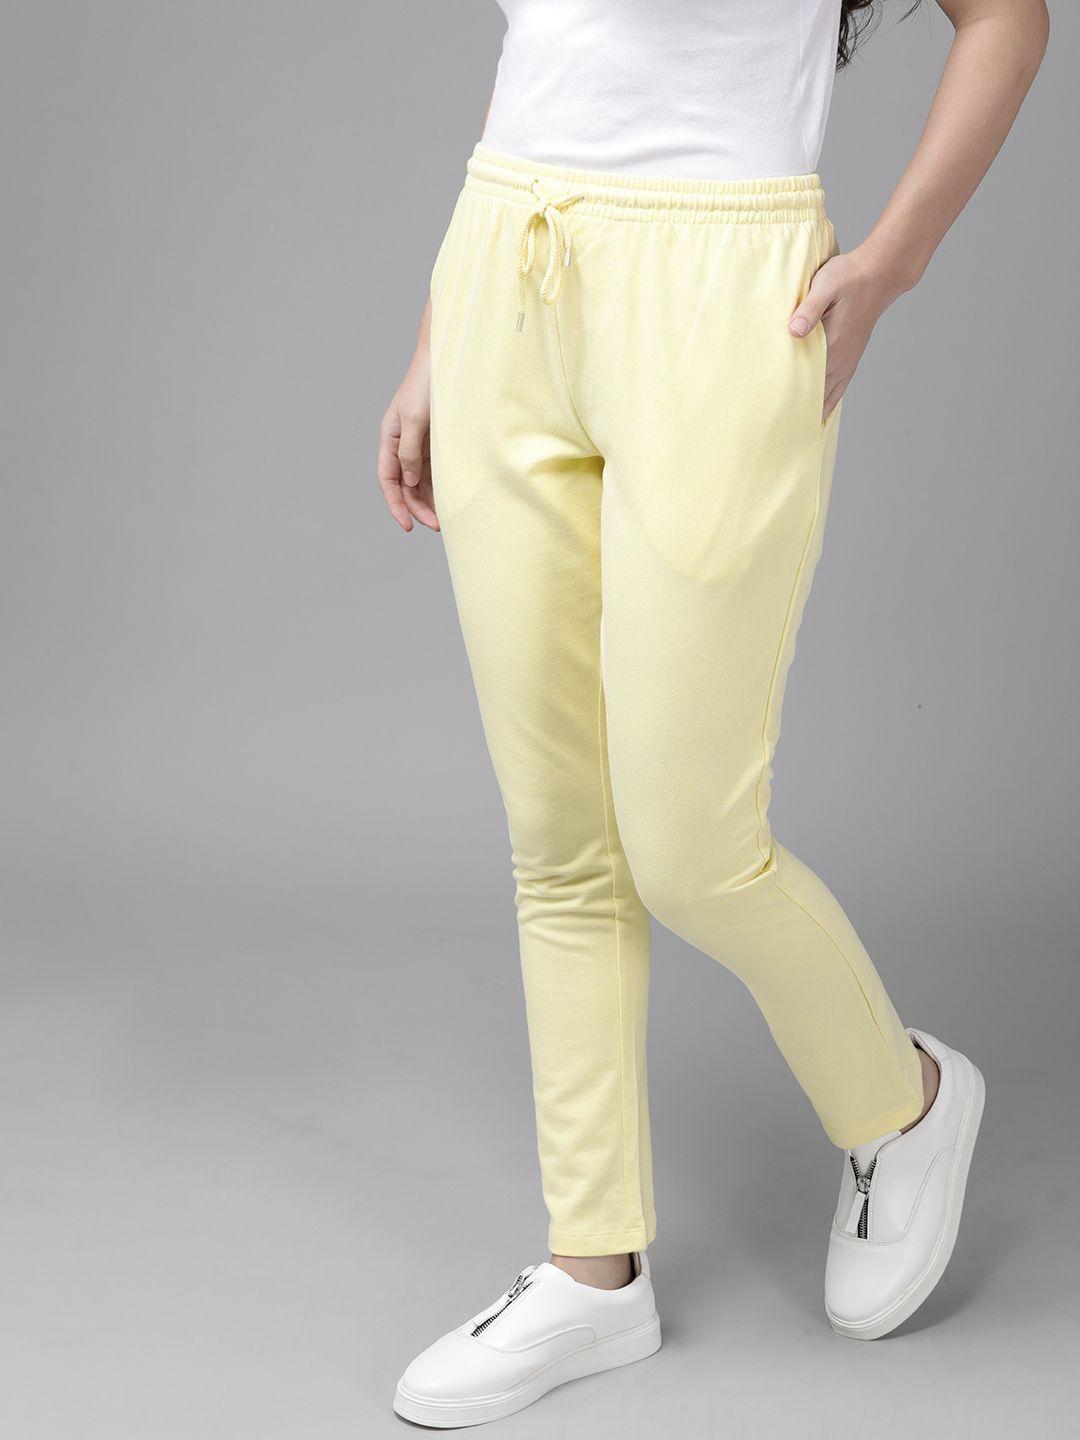 roadster-women-yellow-solid-track-pants